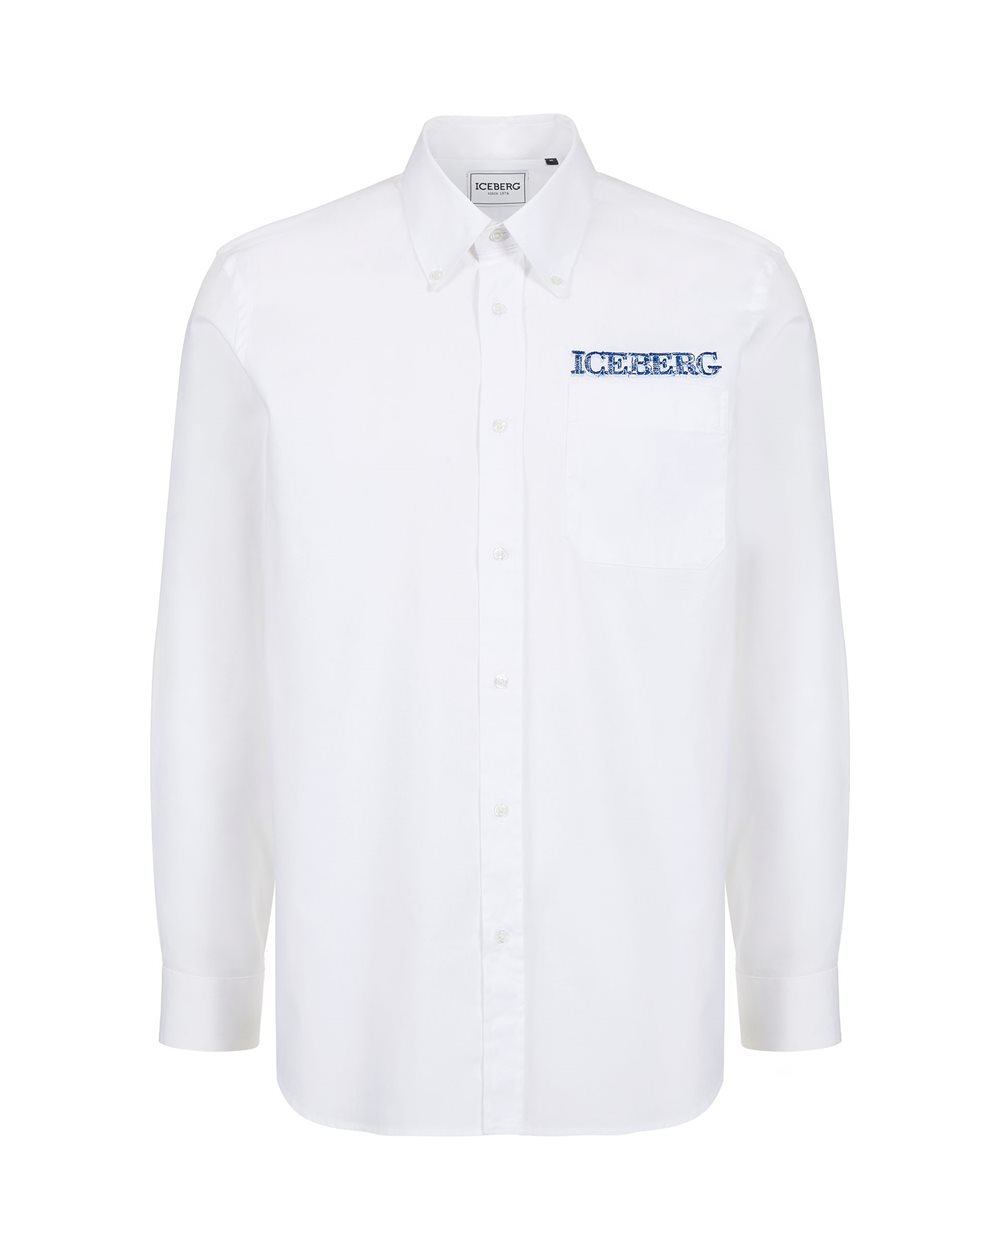 White shirt with logo - shirts | Iceberg - Official Website